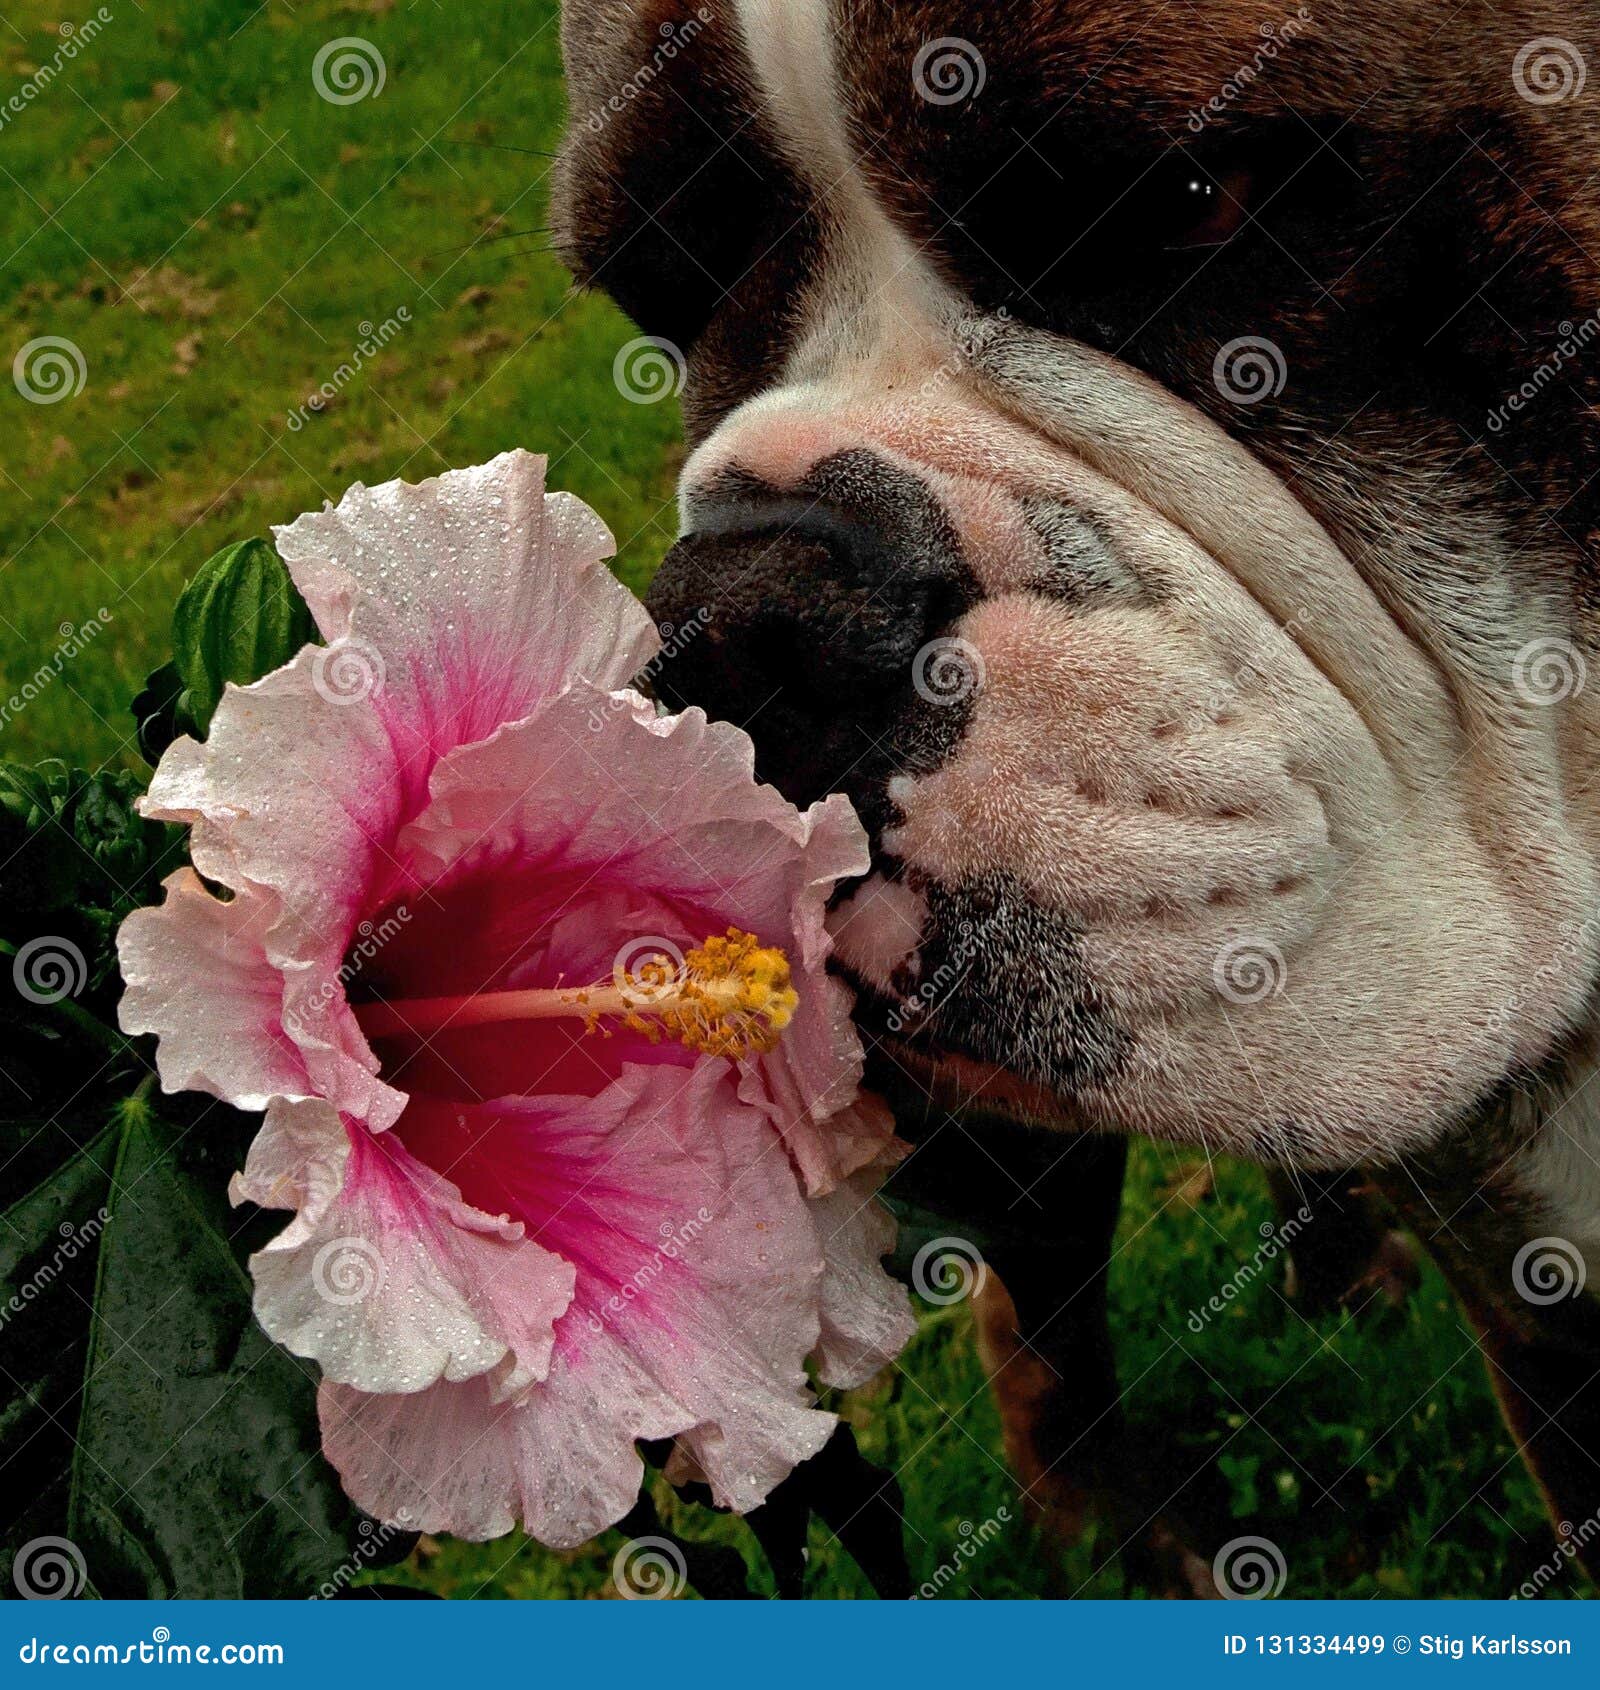 Bulldog Smell Tropical Flowers Of Hibiscus Stock Image Image Of Flowers Defender